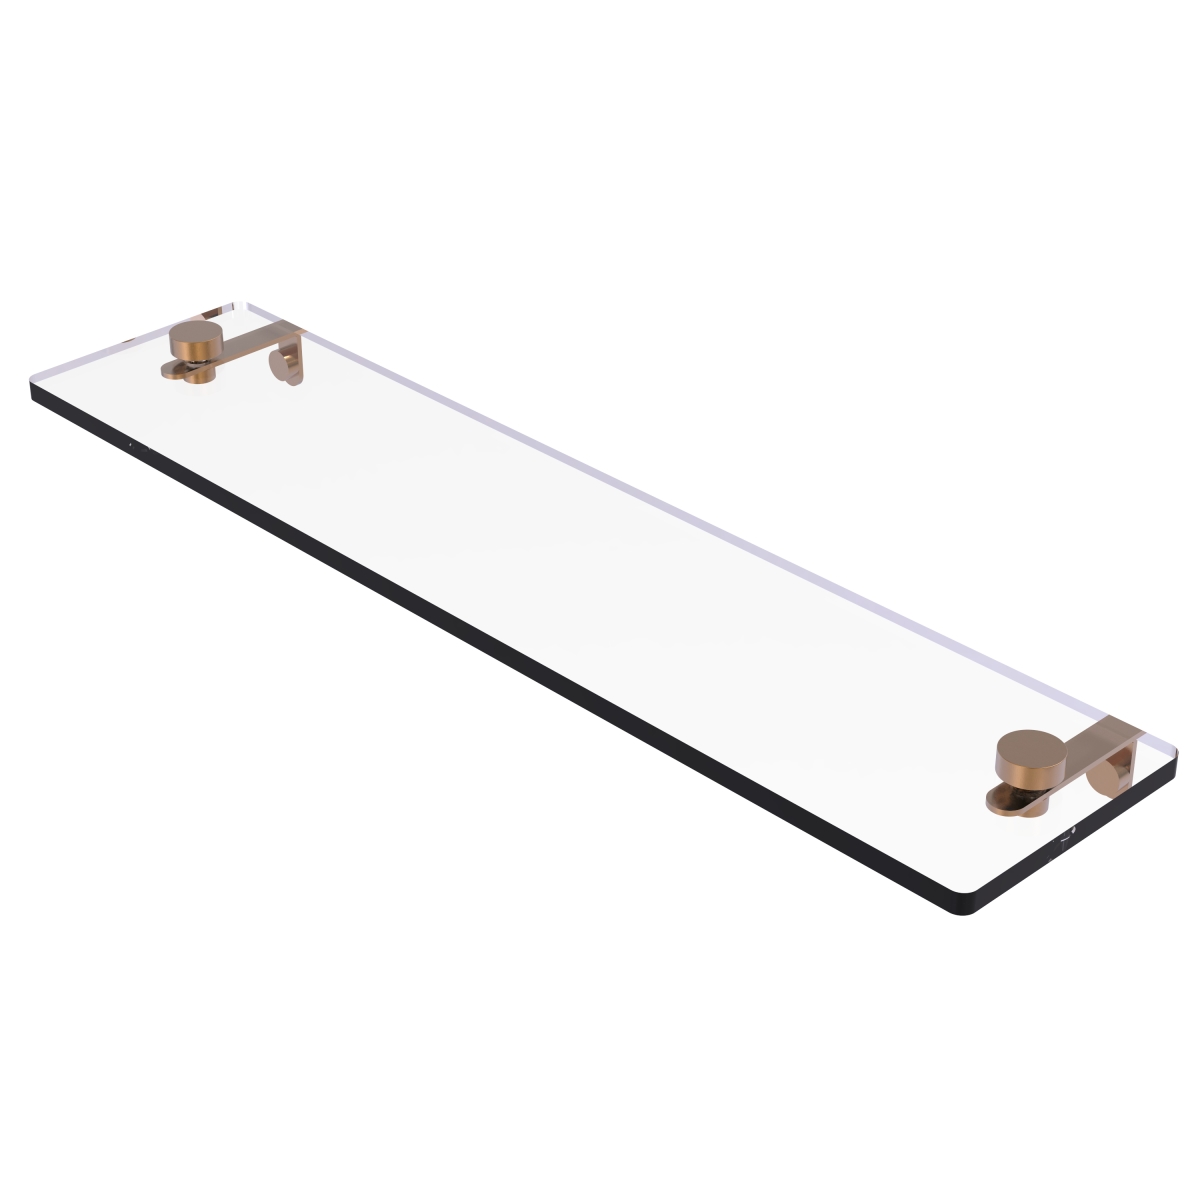 Allied Brass NS-1-22-BBR 22 in. Glass Vanity Shelf with Beveled Edges, Brushed Bronze